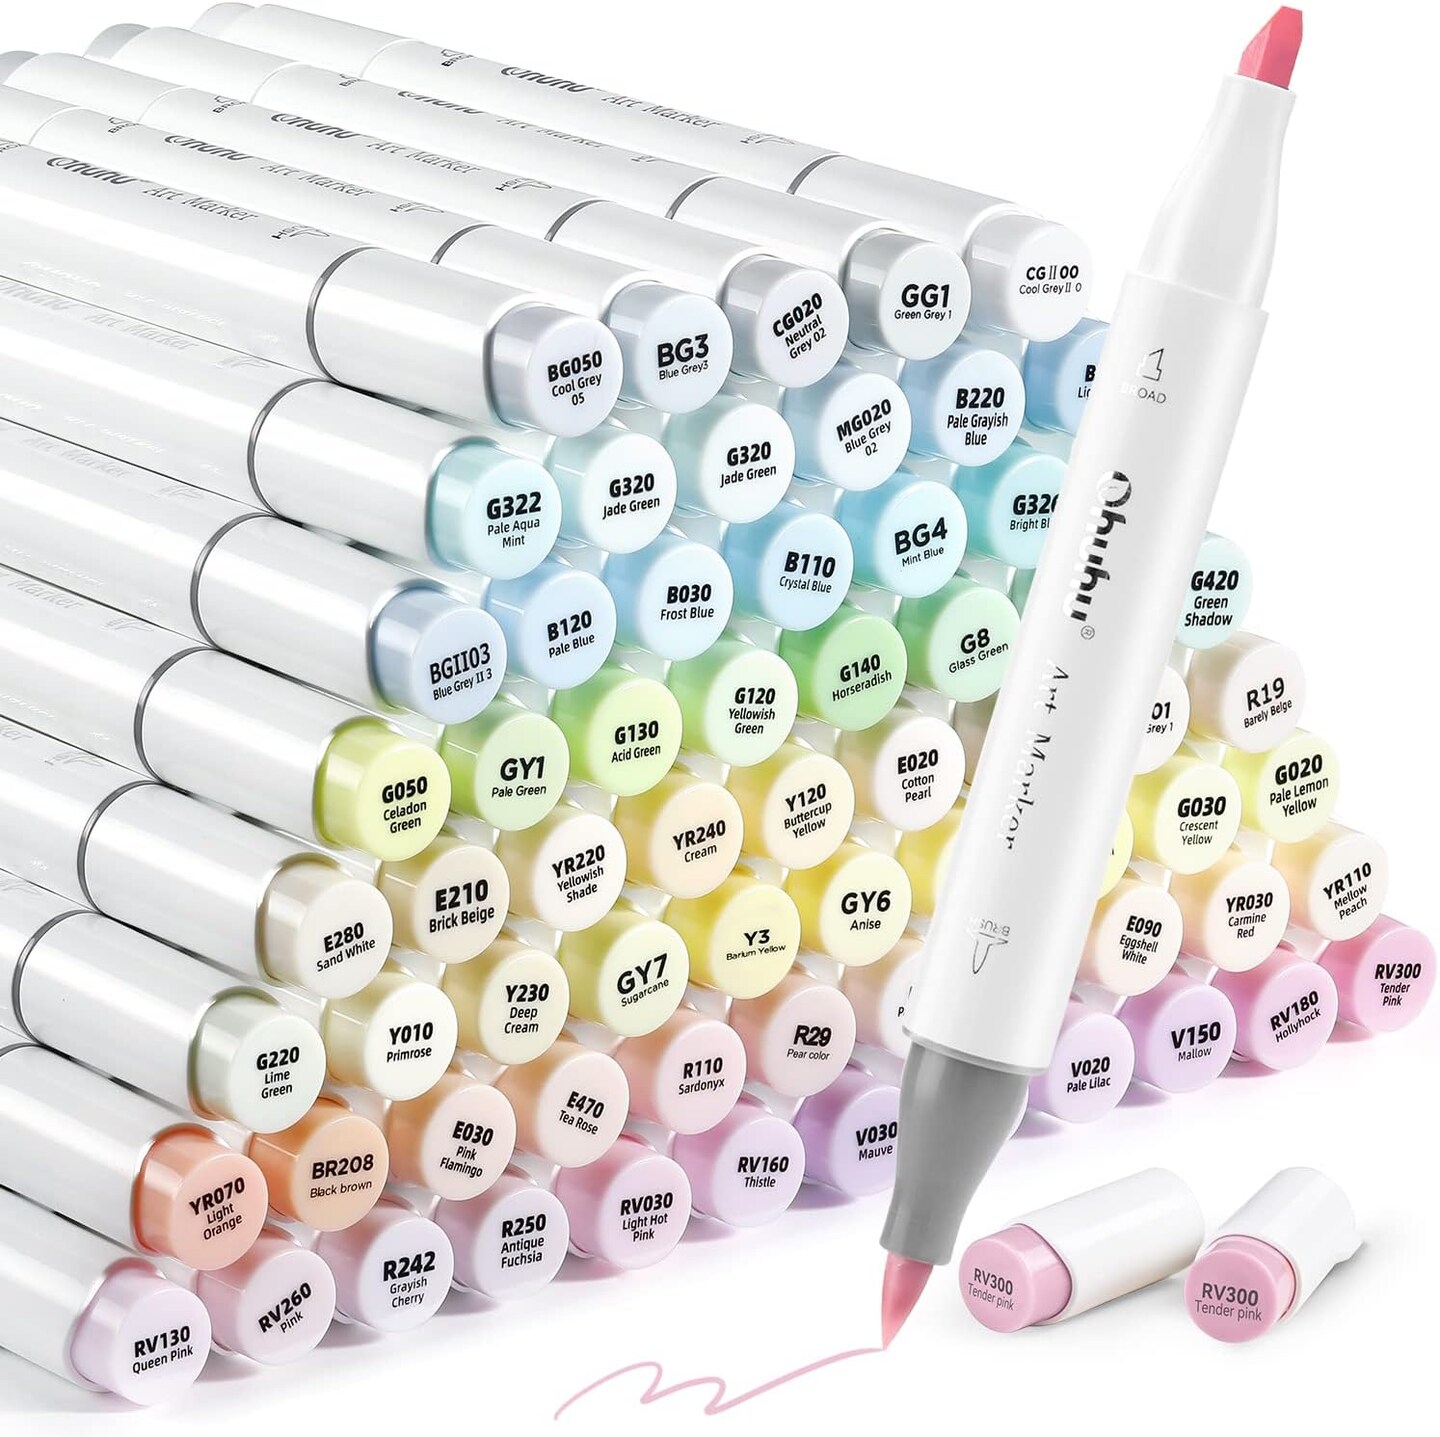 Ohuhu Pastel Markers Alcohol Based -96 Pastel Colors of Honolulu Sweetness  + Blossoming - Double Tipped Art Alcohol Markers for Artist Adults'  Coloring Illustration - Brush & Chisel - Refillable Ink